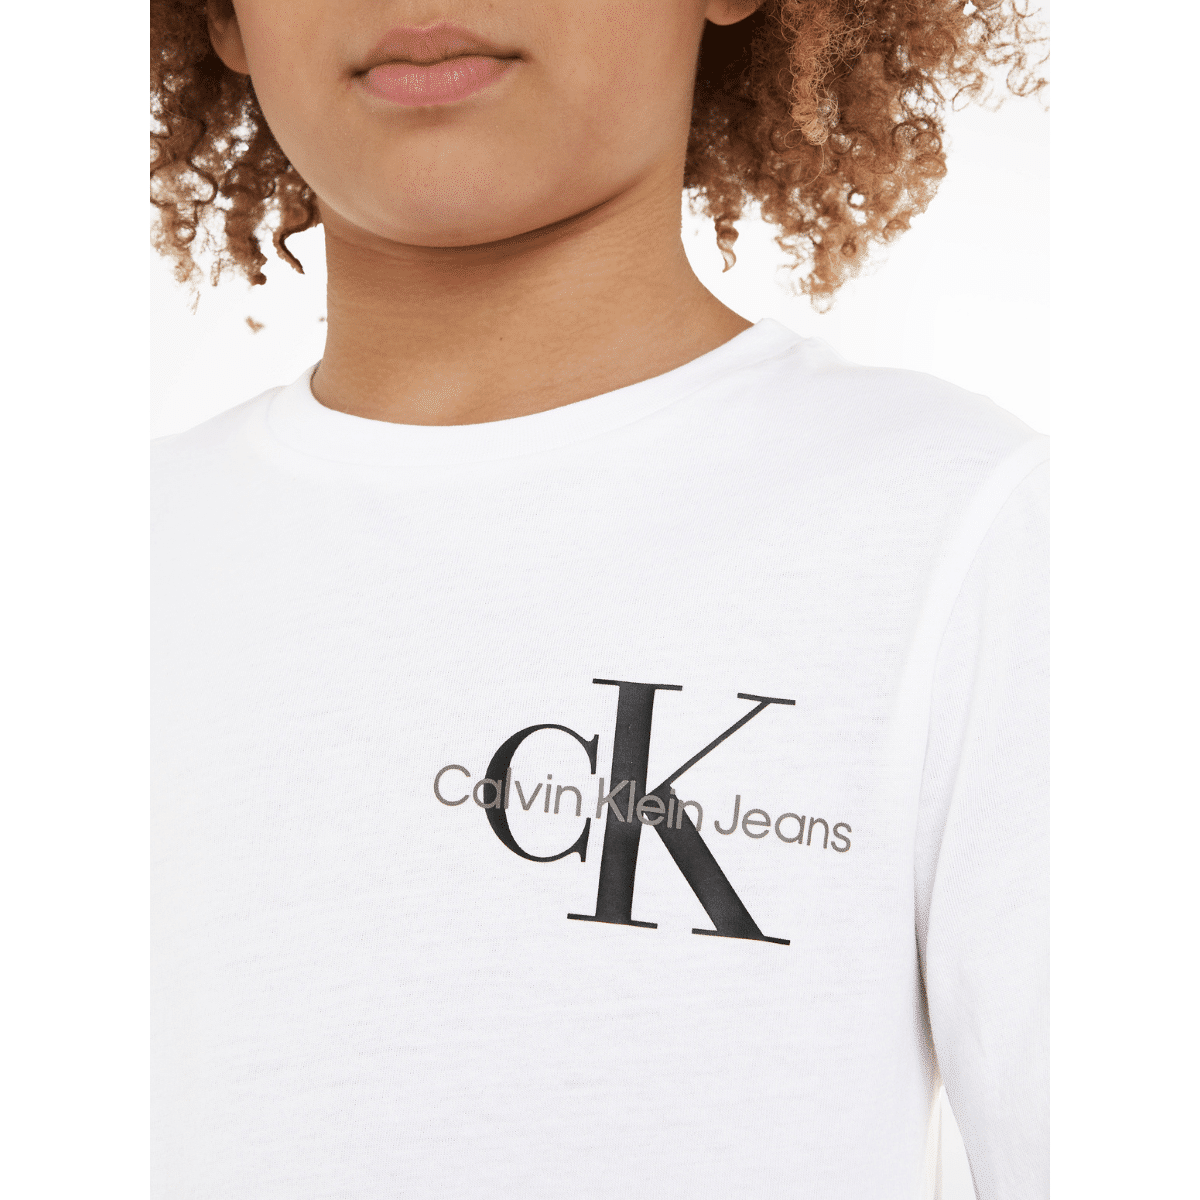 calvin klein childrens white long sleeved top with black logo on model close up